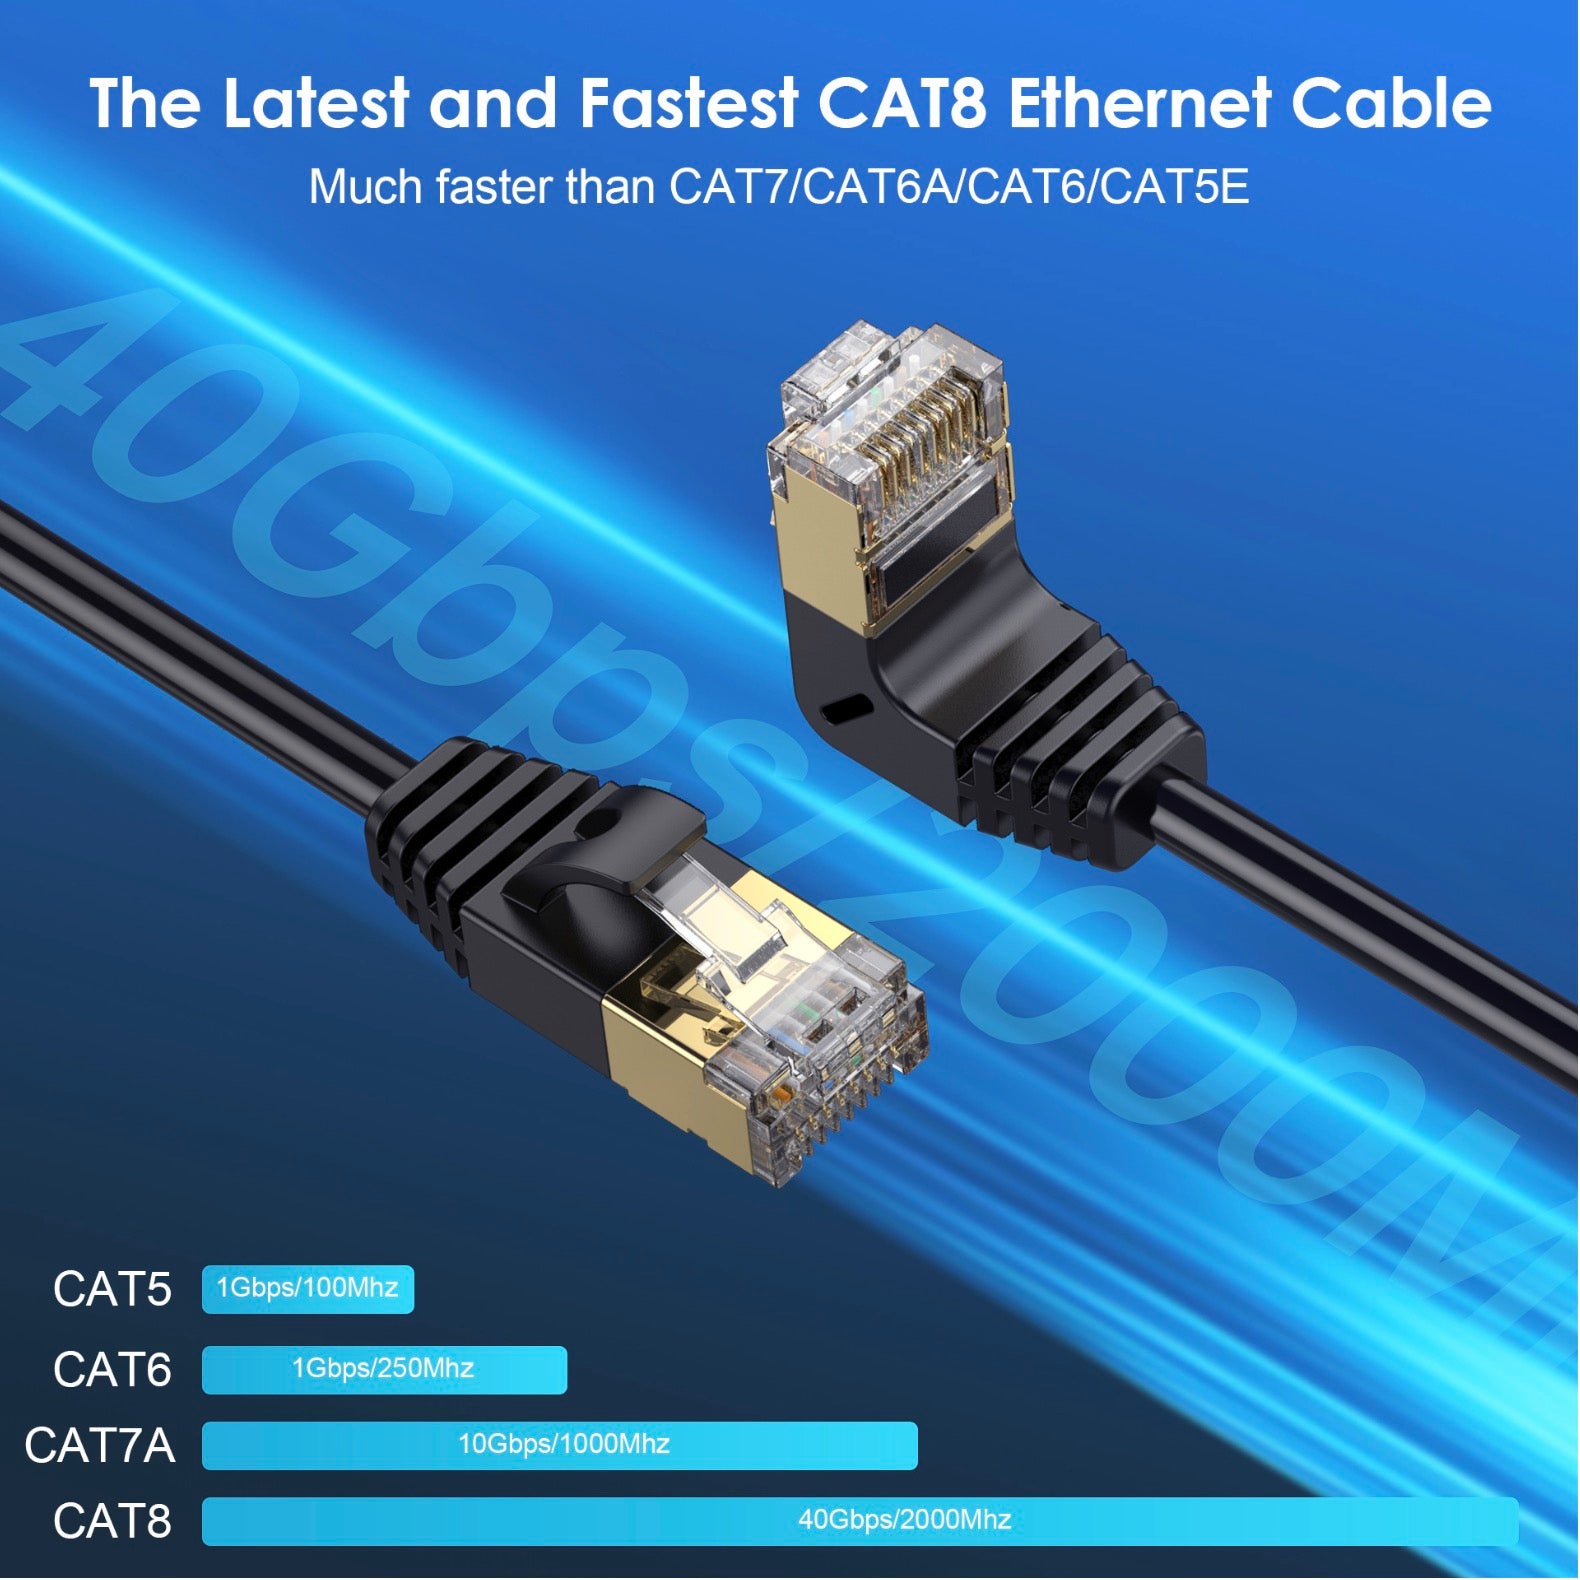 CAT 8 RJ45 Ethernet Cable 40Gbps 2000Mhz High Speed Gigabit SFTP LAN Network (Straight to Up)